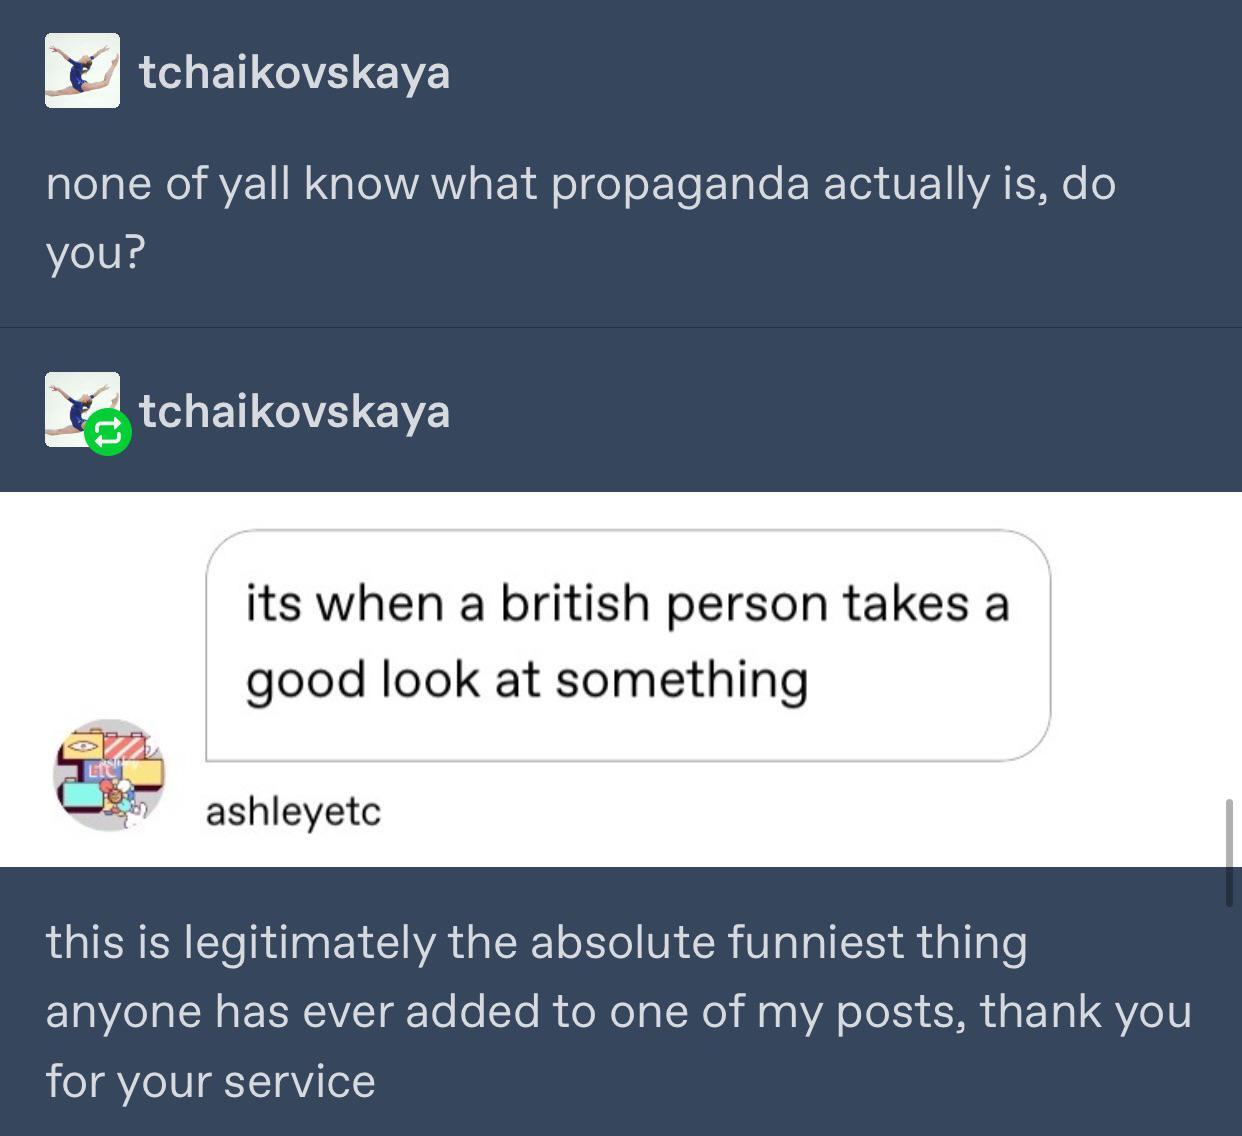 software - tchaikovskaya none of yall know what propaganda actually is, do you? tchaikovskaya its when a british person takes a good look at something ashleyetc this is legitimately the absolute funniest thing anyone has ever added to one of my posts, tha